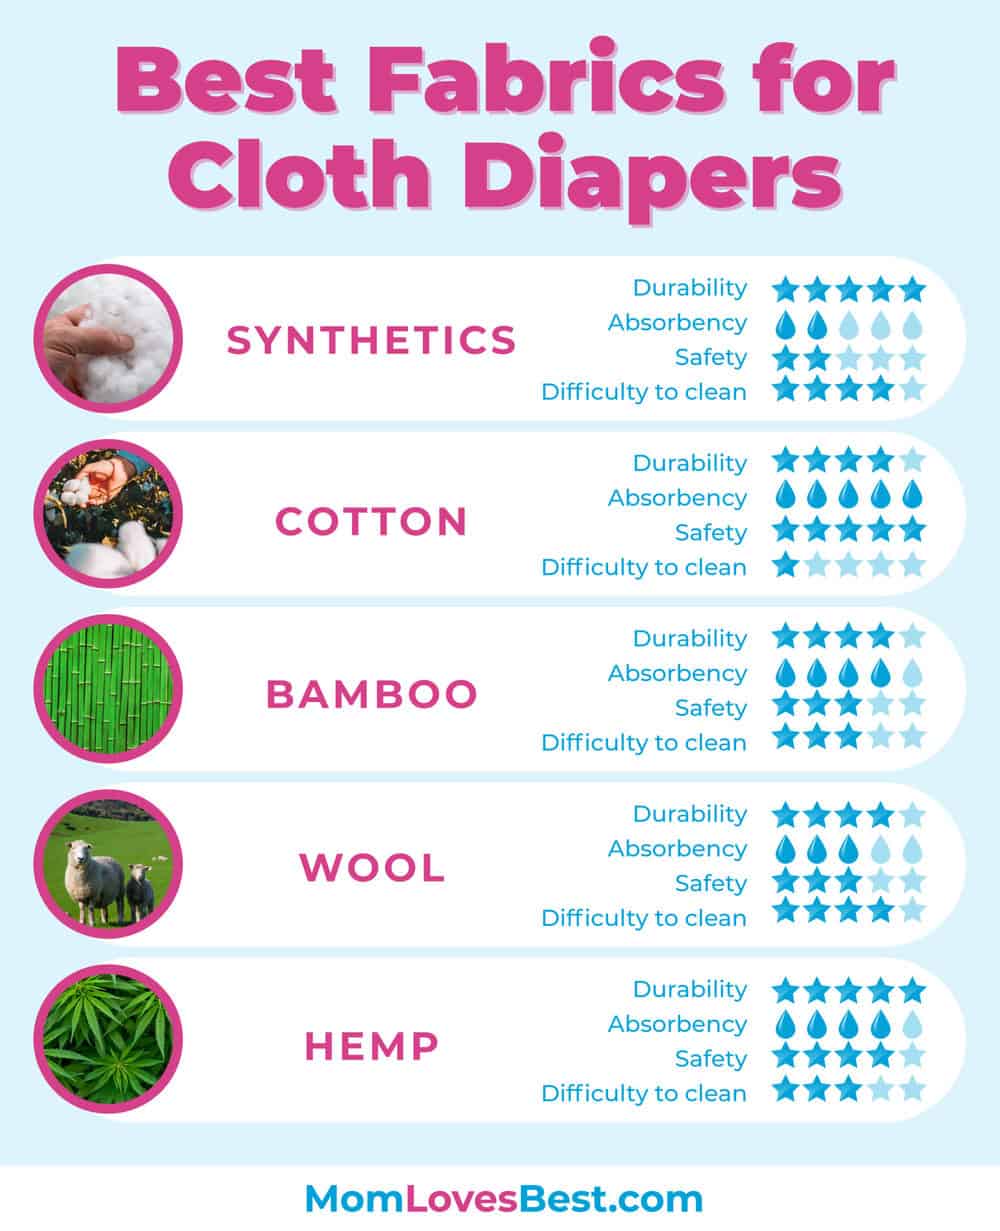 Best Fabrics for Cloth Diapers